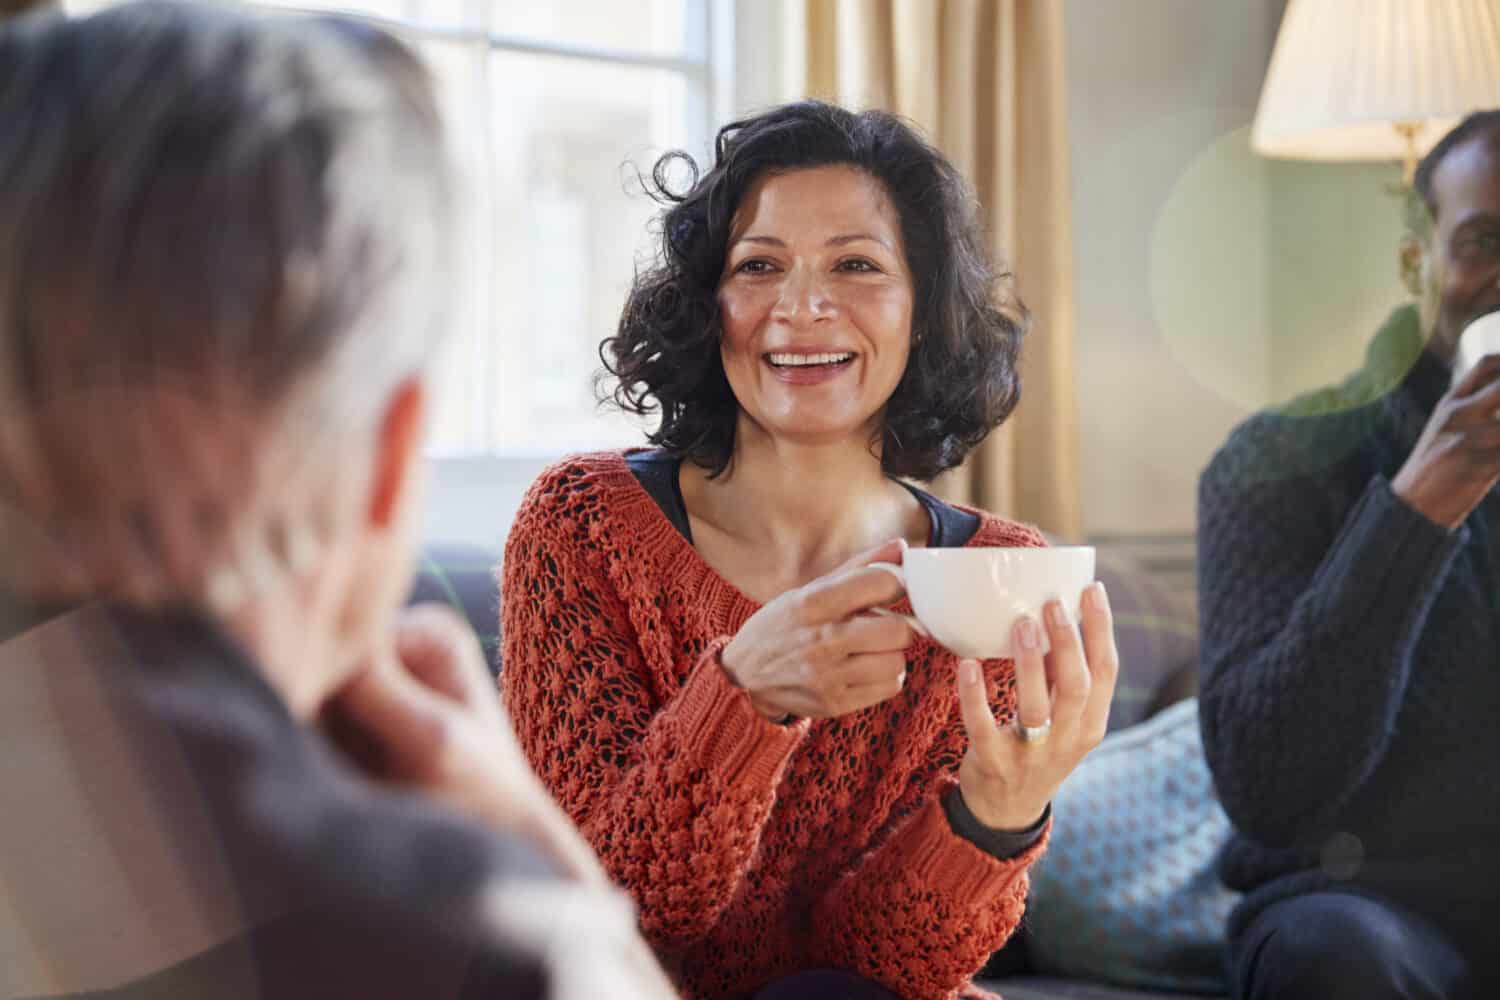 Middle aged woman meeting friends around table, wearing her best online hearing aid.